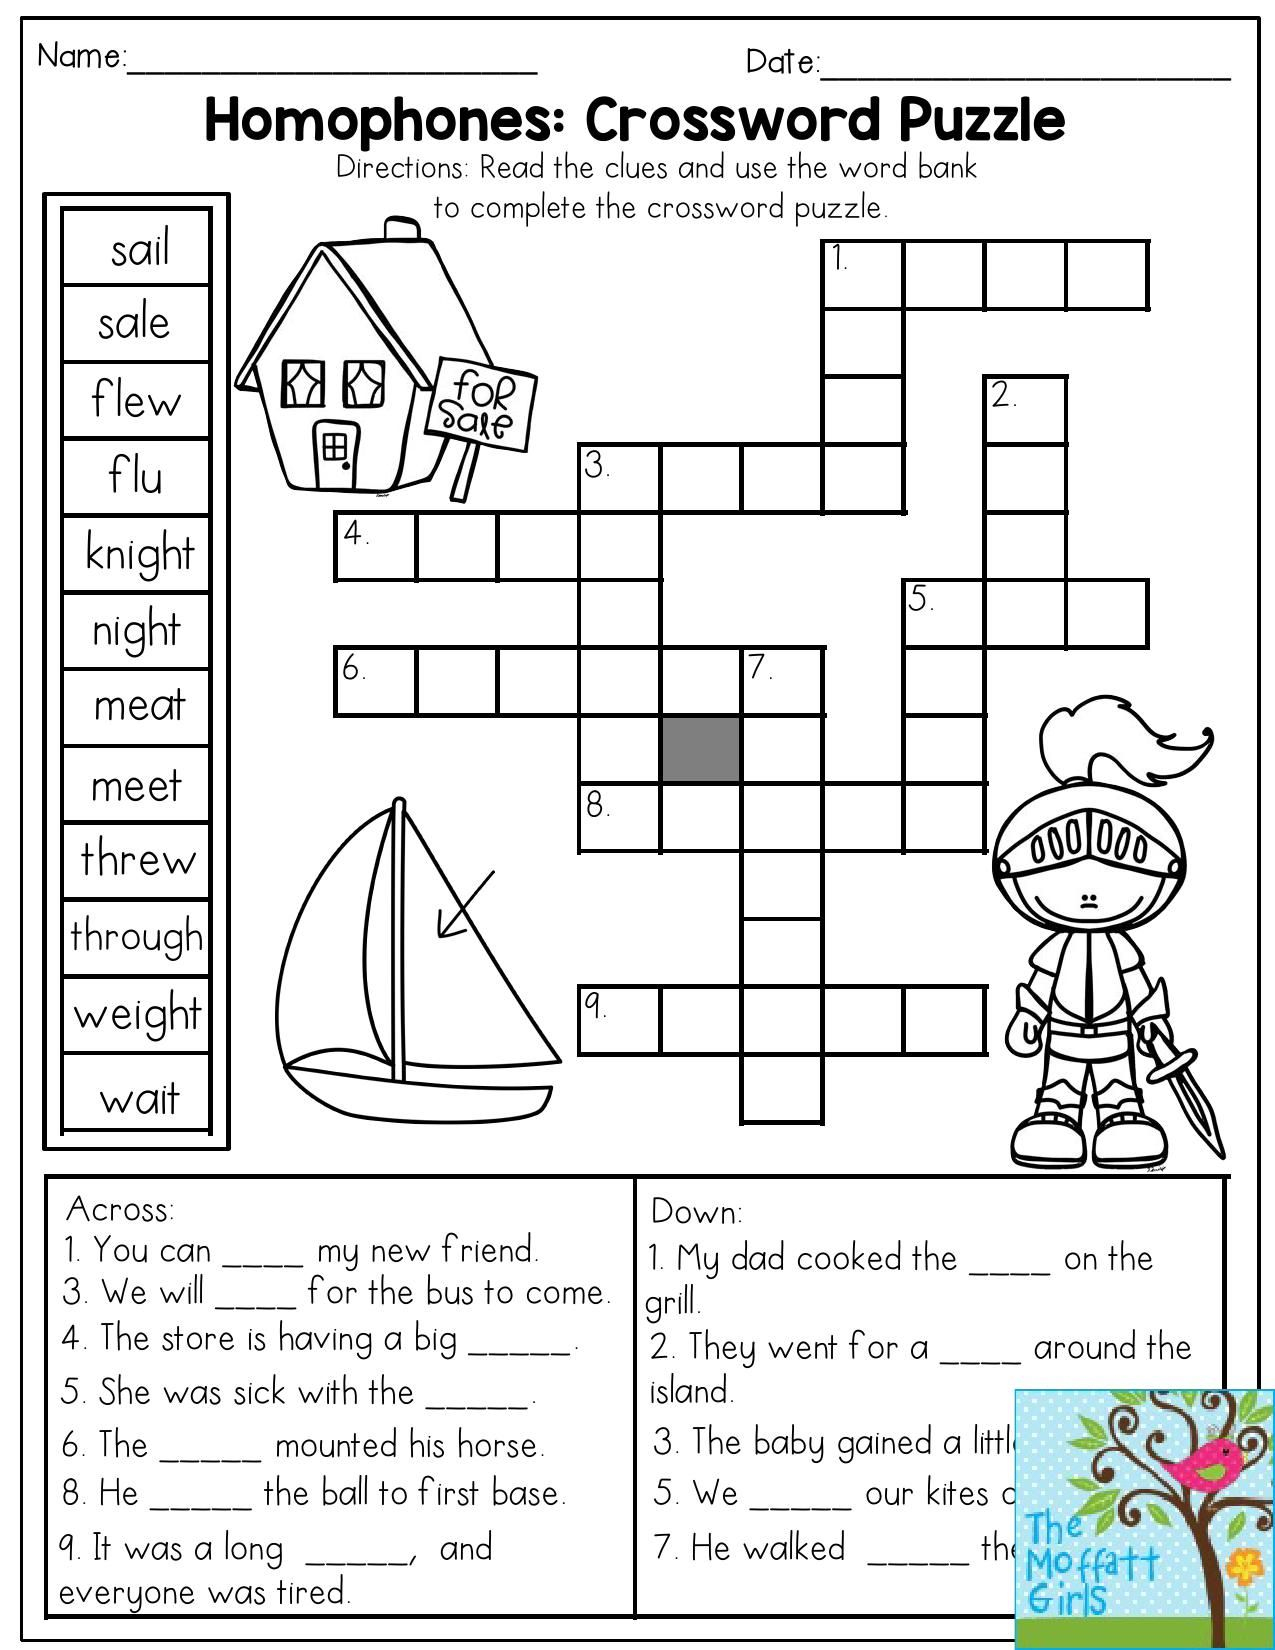 Homophones: Crossword Puzzle- Read The Clues And Use The Word Bank - Printable Compound Word Crossword Puzzle